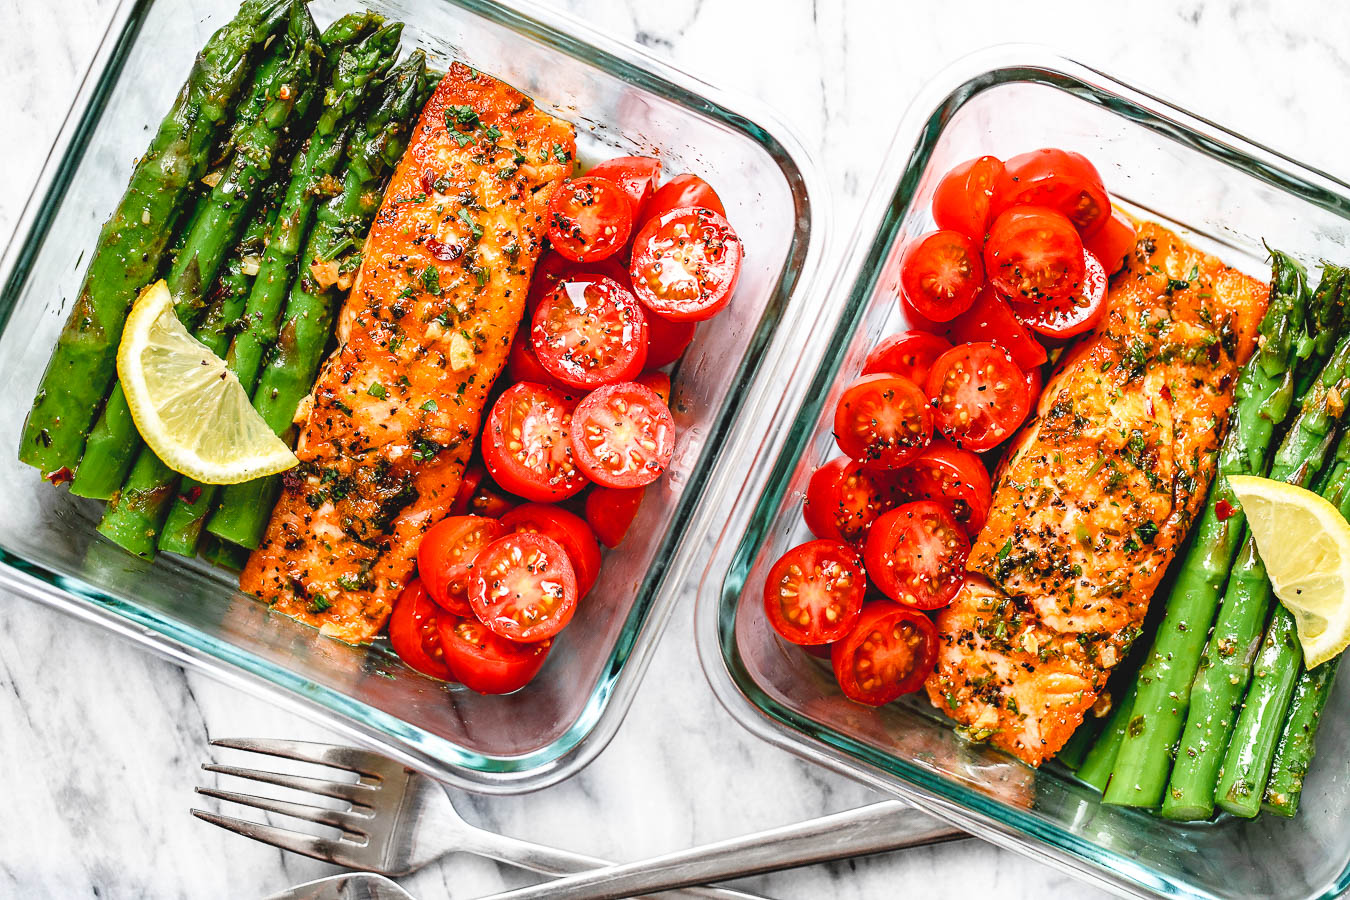 https://www.eatwell101.com/wp-content/uploads/2019/07/salmon-and-asparagus-meal-prep-recipe-idea.jpg